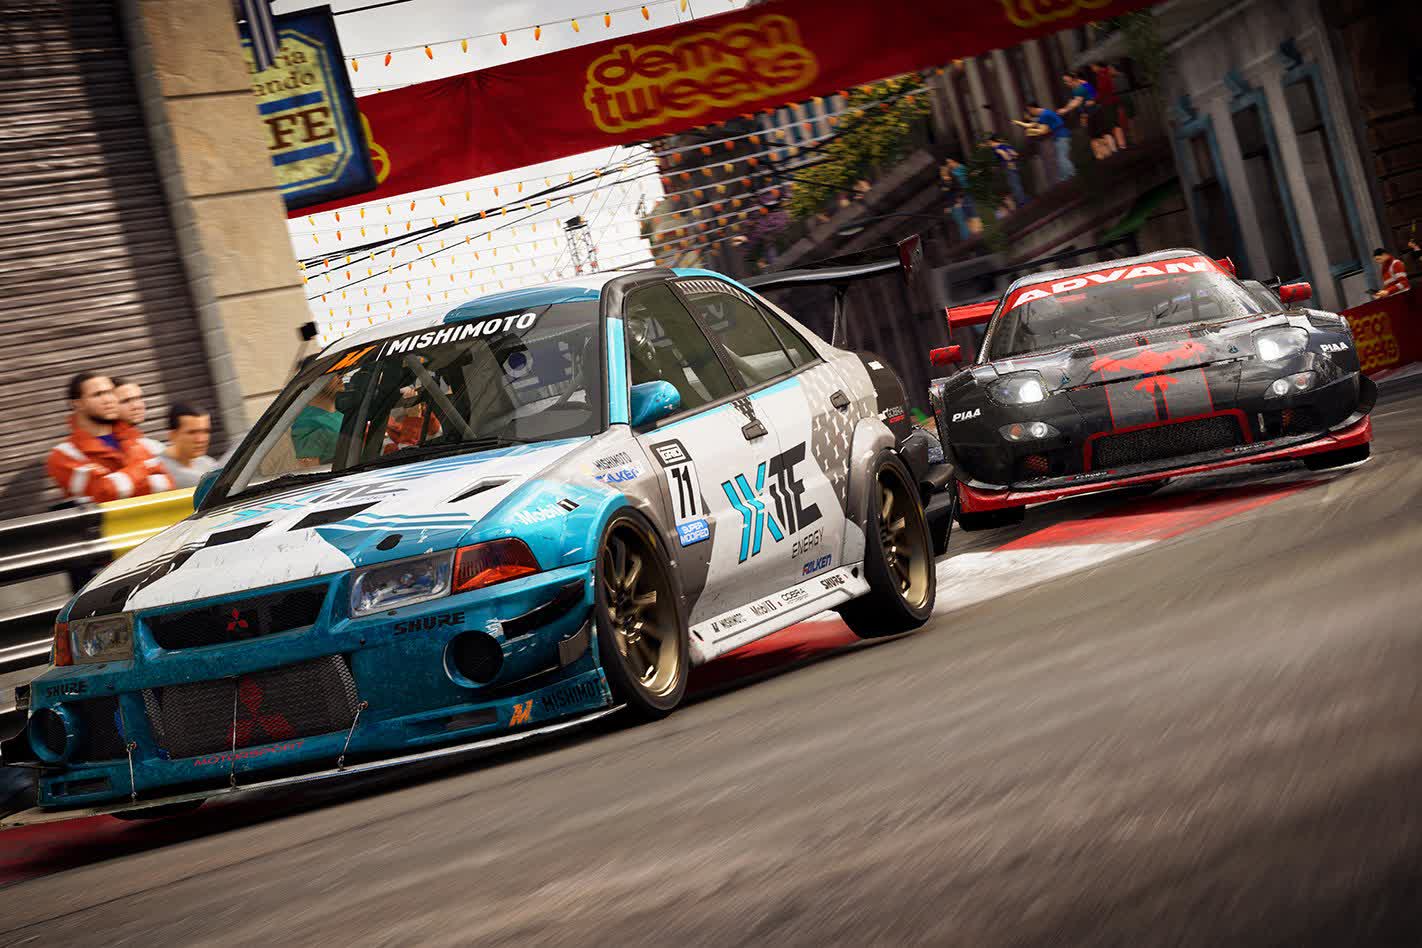 Project Cars 1 and 2 receive deep discounts before leaving digital store shelves this fall